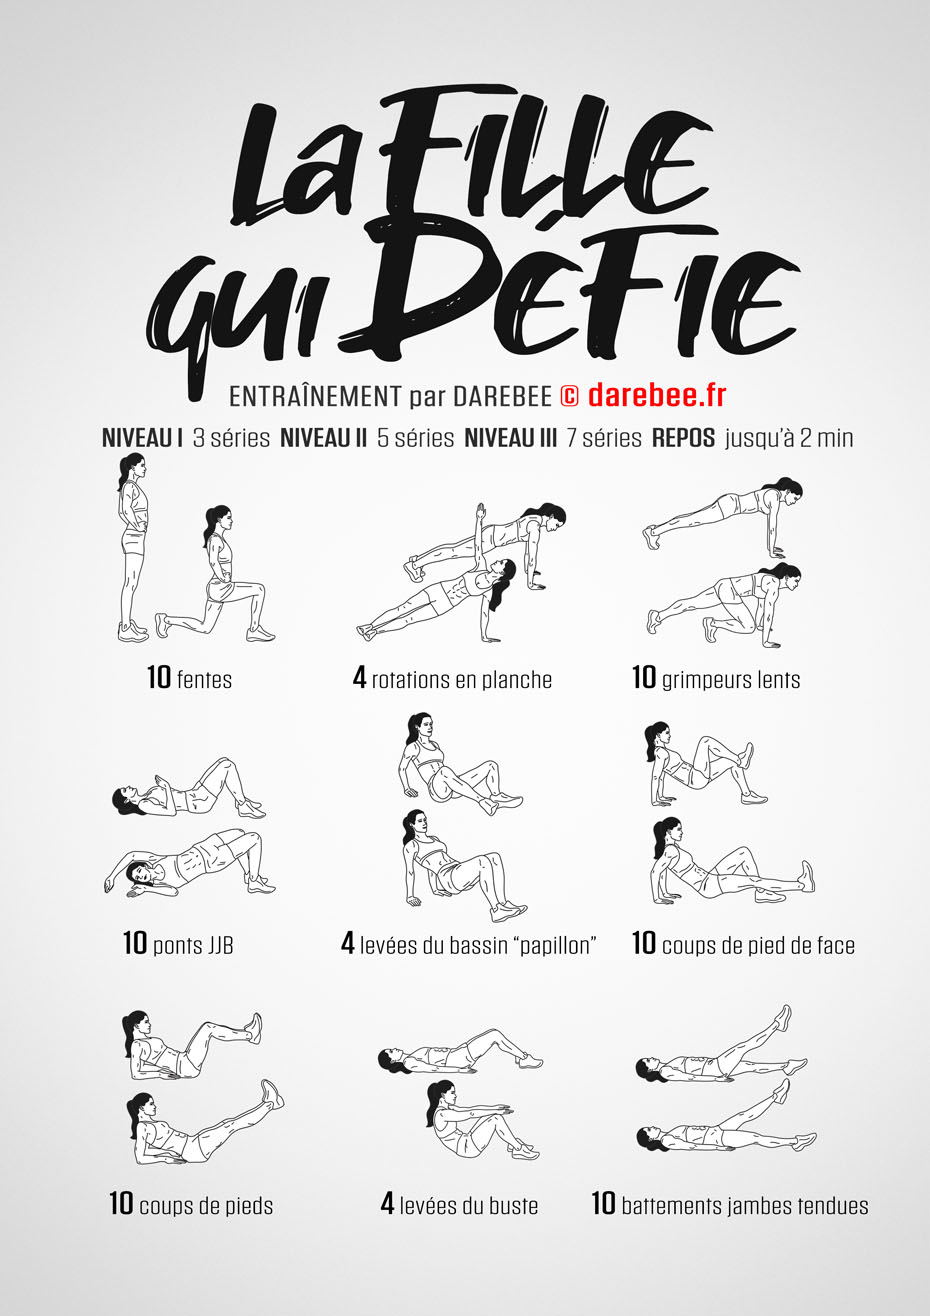 The Girl Who Dared Total Body Workout by Darebee